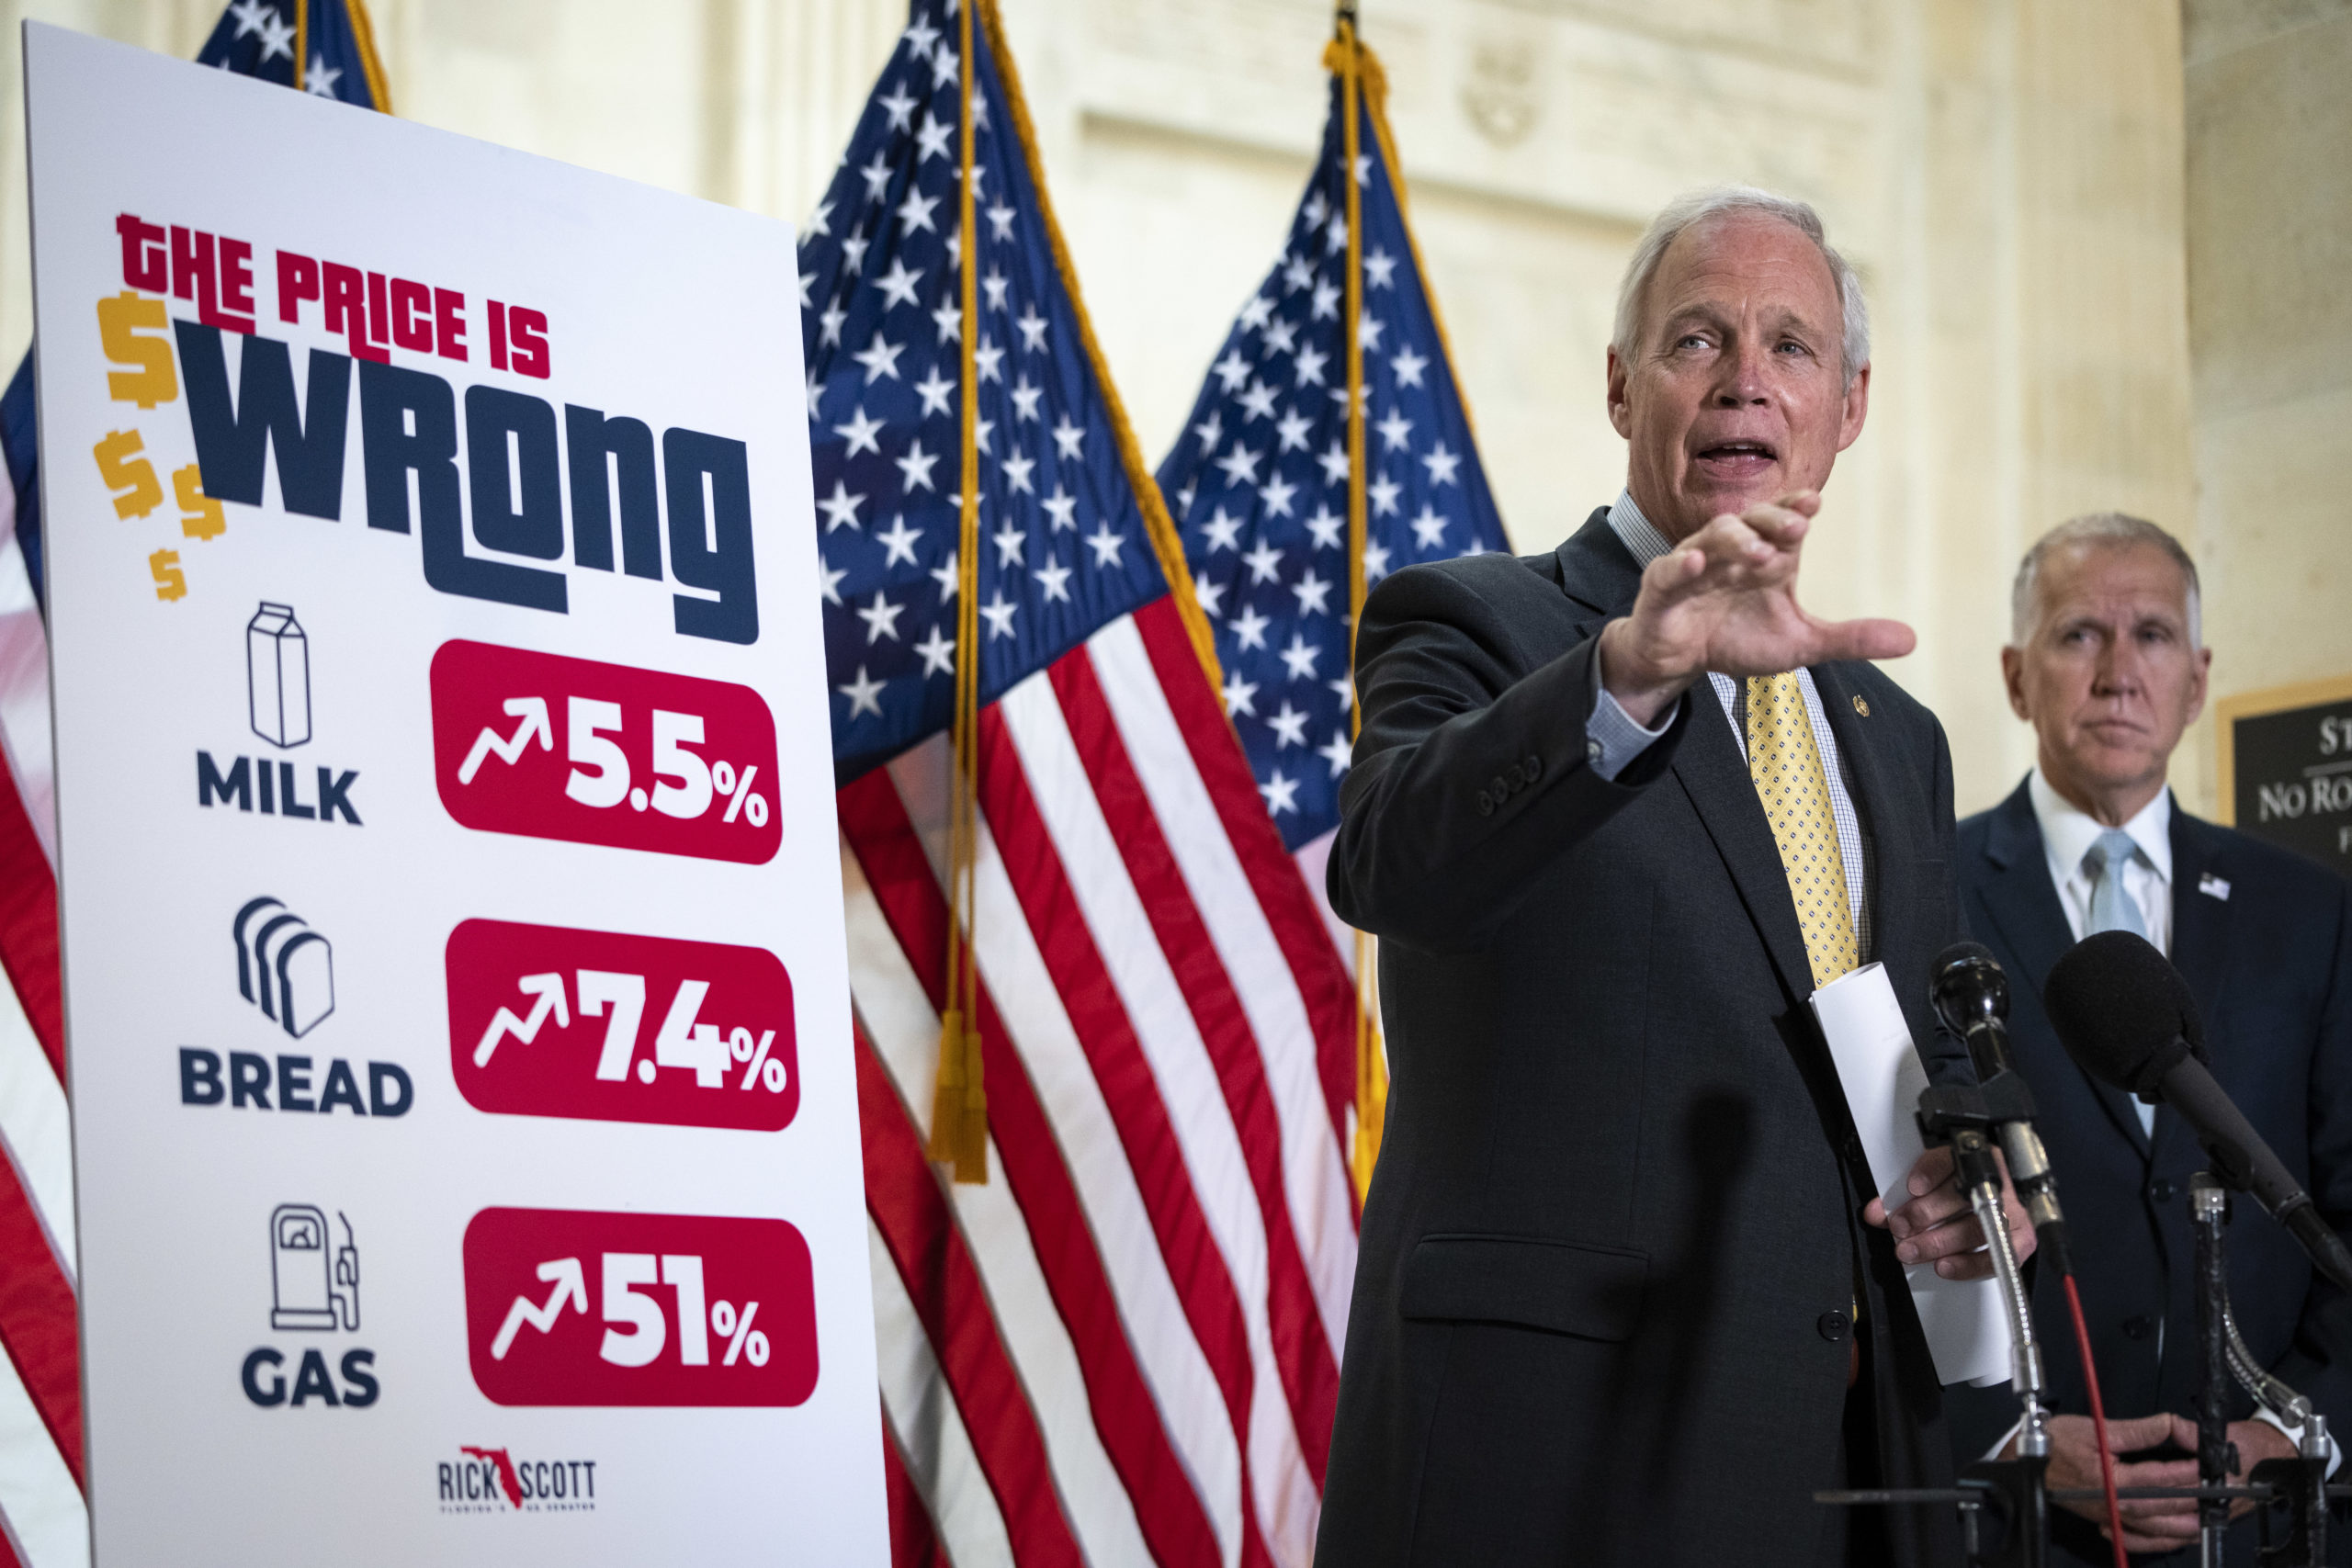 Republican Wisconsin Sen. Ron Johnson speaks during a news conference about inflation on May 26. (Drew Angerer/Getty Images)